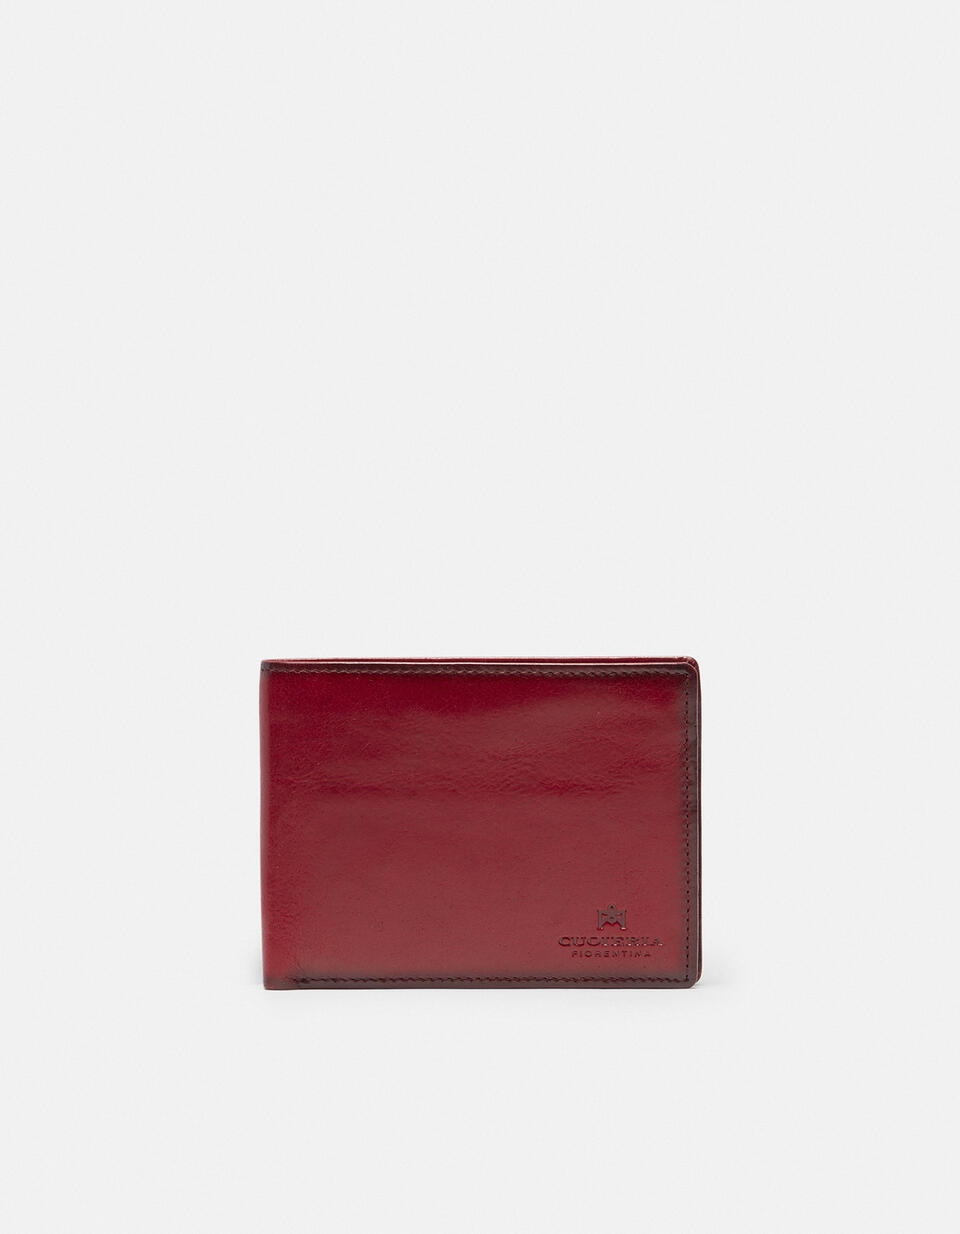 Bifold Wallet Red, Men's Wallets Made In Italy